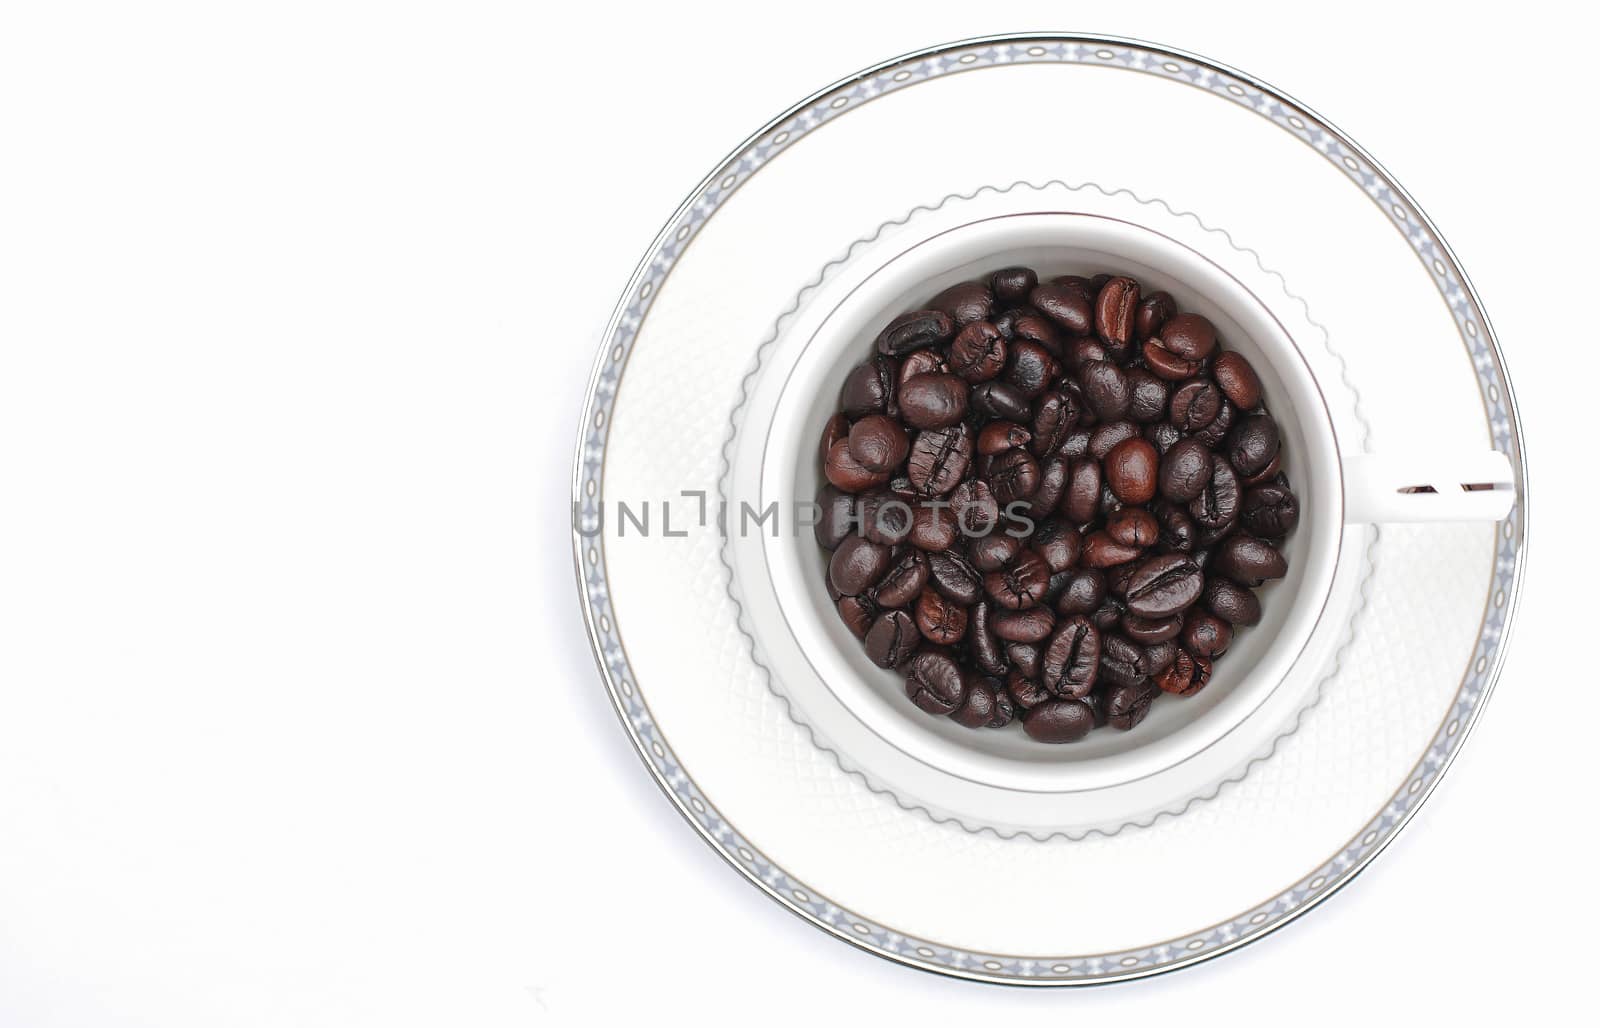 Coffee beans in a glass on a white background.